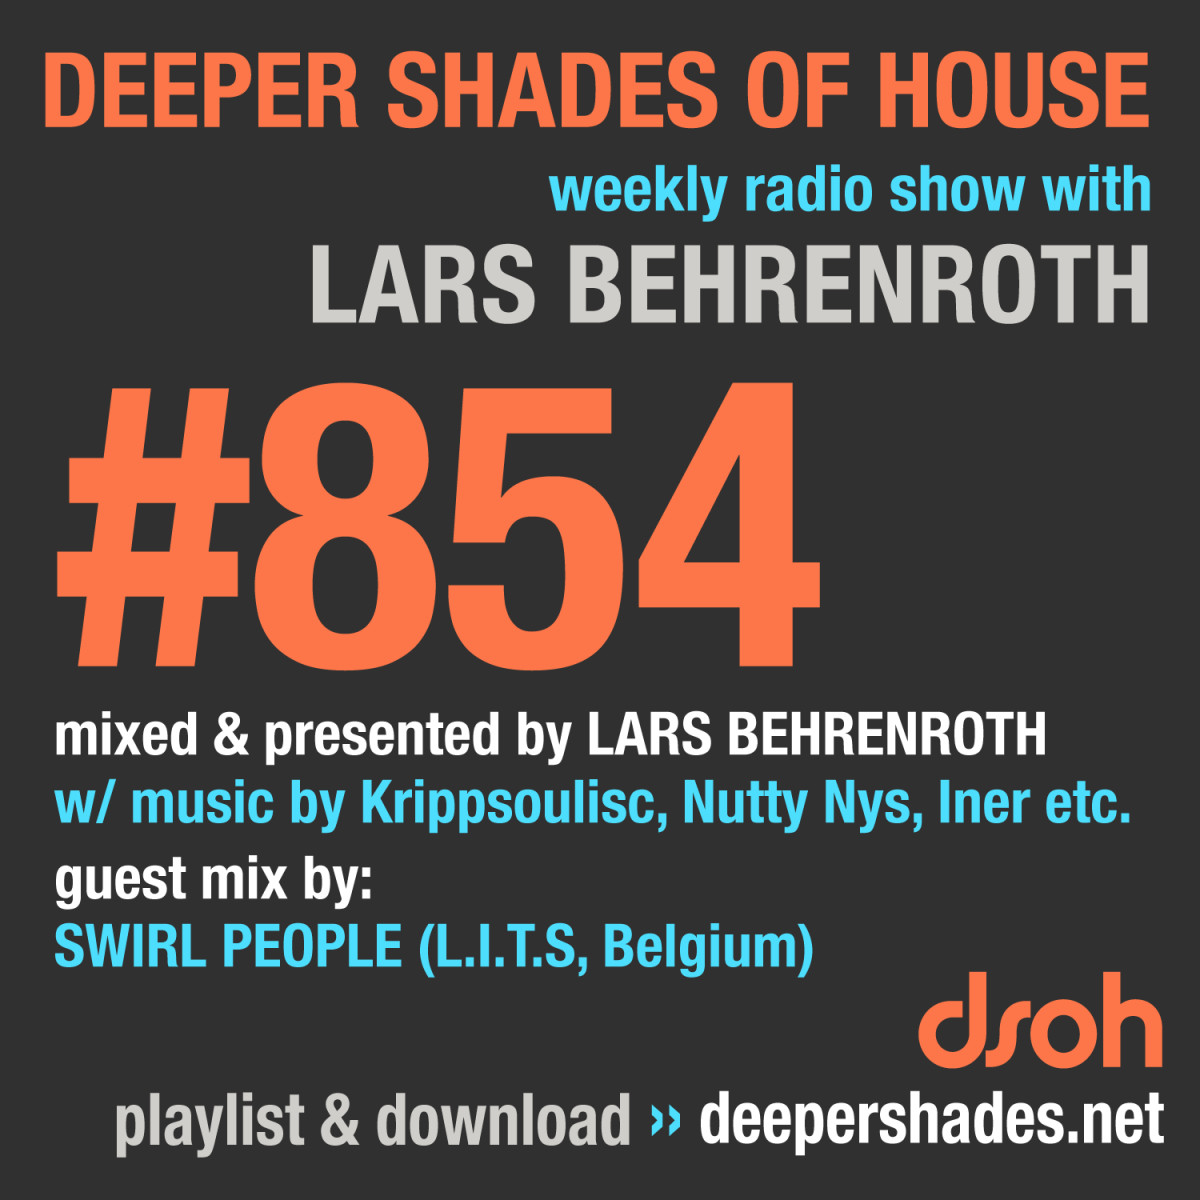 #nowplaying on radio.deepershades.net : Lars Behrenroth w/ exclusive guest mix by SWIRL PEOPLE (Belgium) - DSOH 854 Deeper Shades Of House #deephouse #livestream #dsoh #housemusic